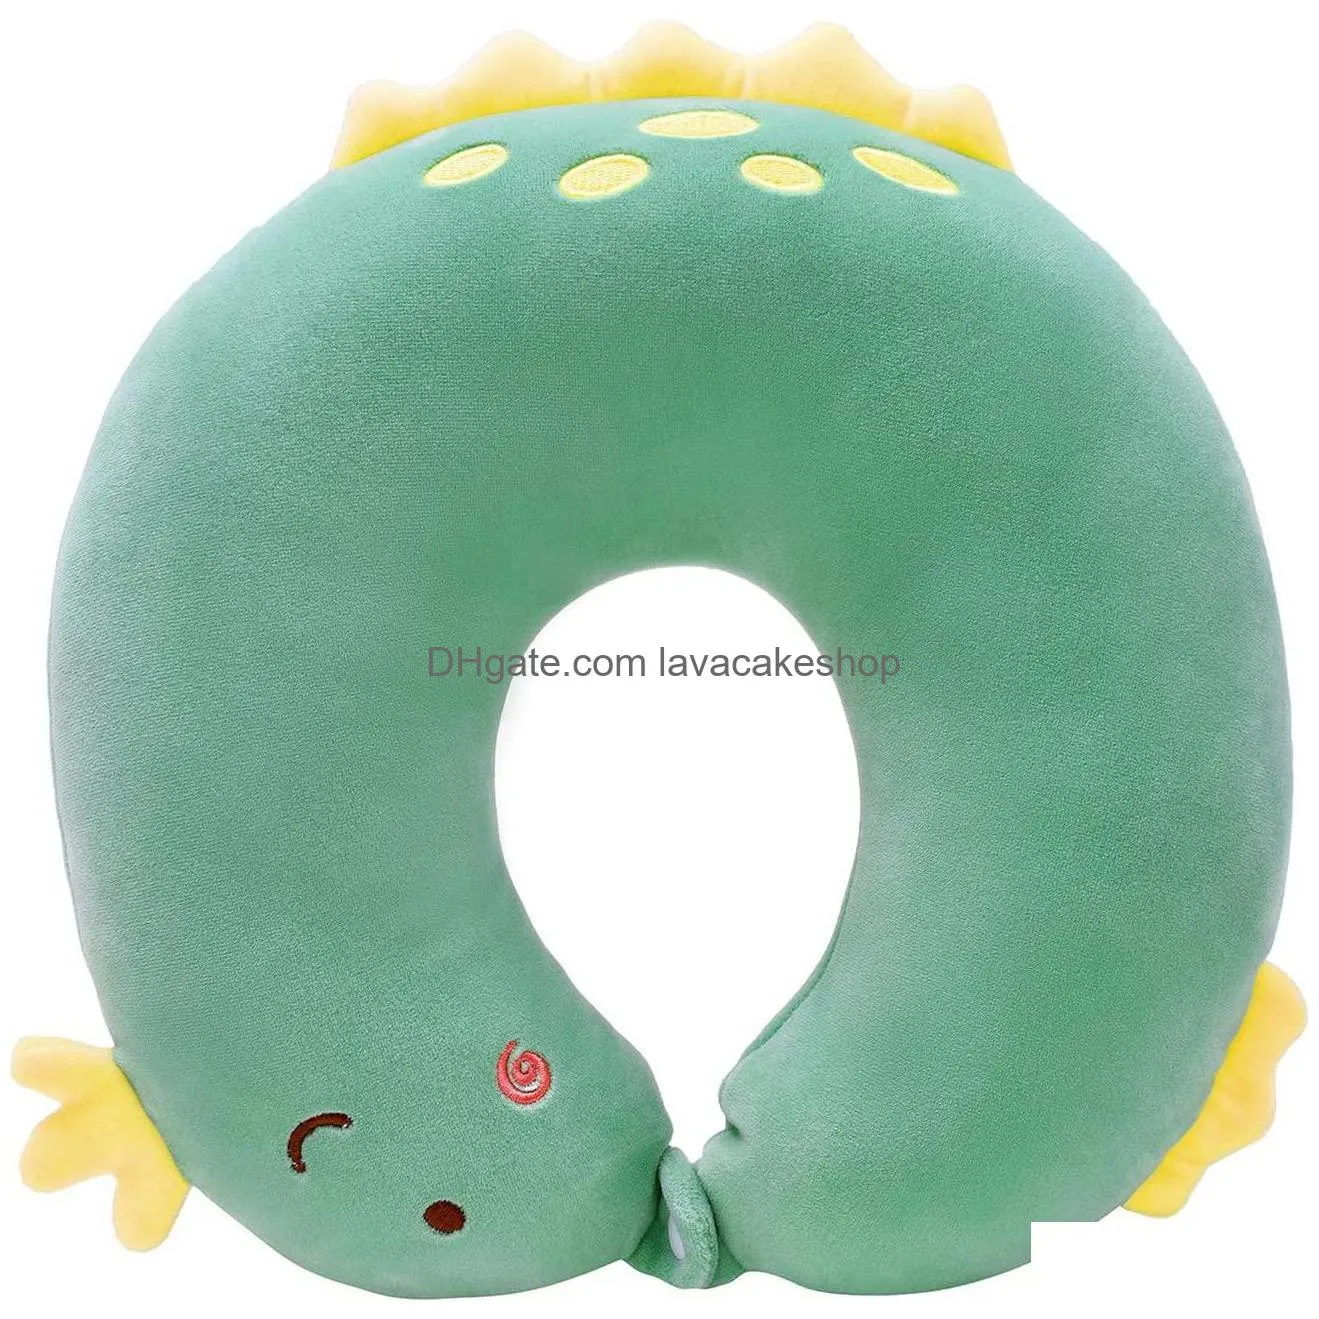 kids travel pillow neck pillow support u shaped cushion plush for airplane train car